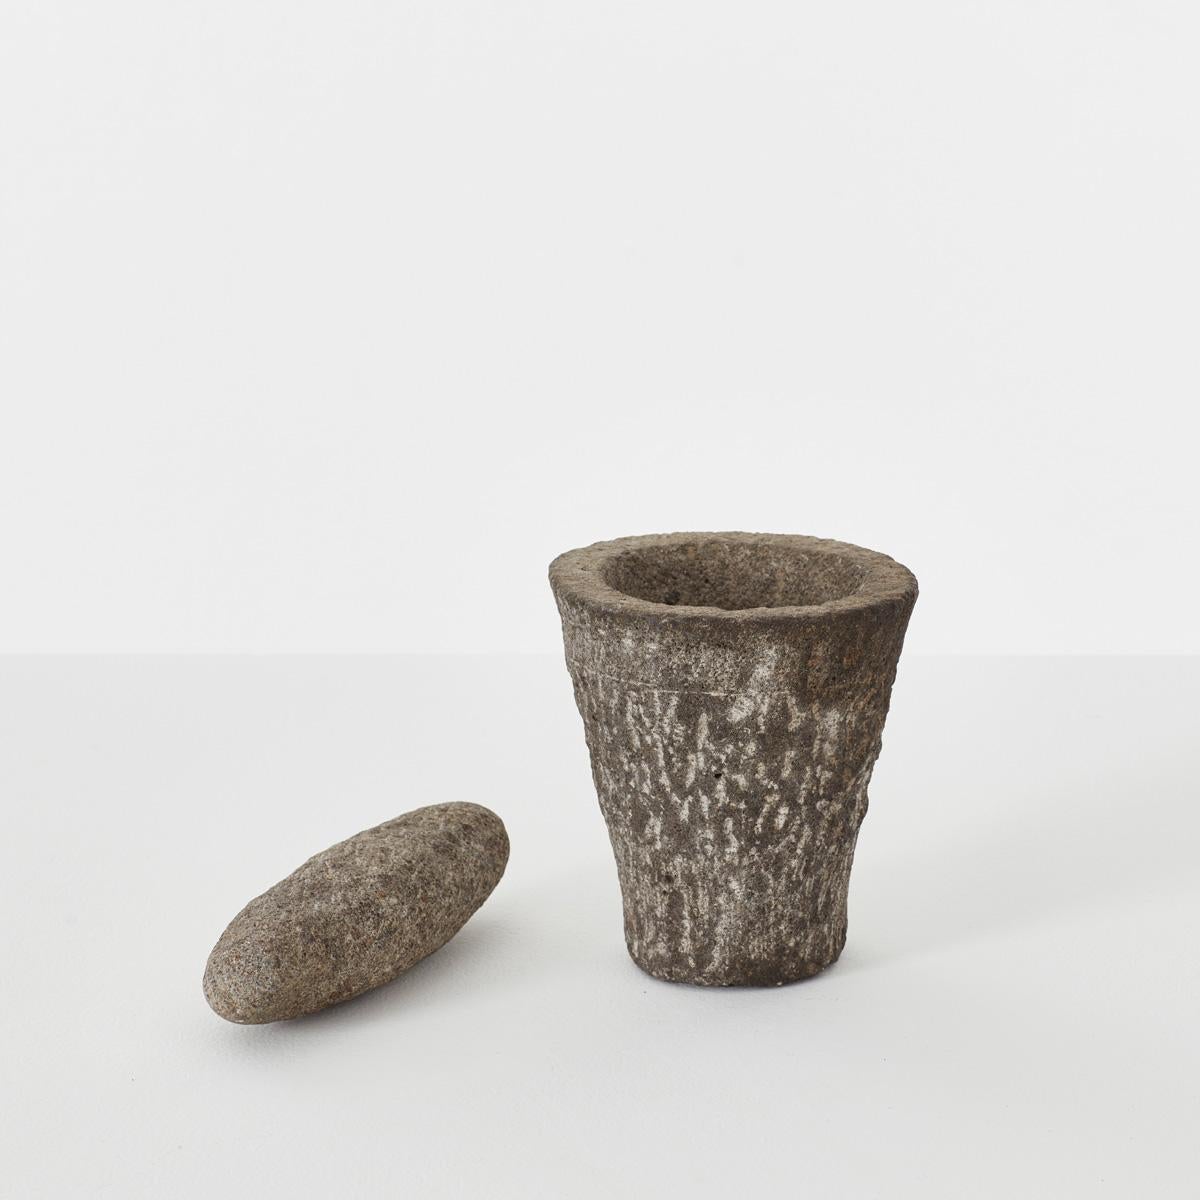 This cute mortar and pestle set has been naively carved from a lovely dark Granite stone.

The exterior of the mortar shows pleasing chisel marks across is surfaces whilst the internal bowl element is more smooth. It comes with a matching pestle